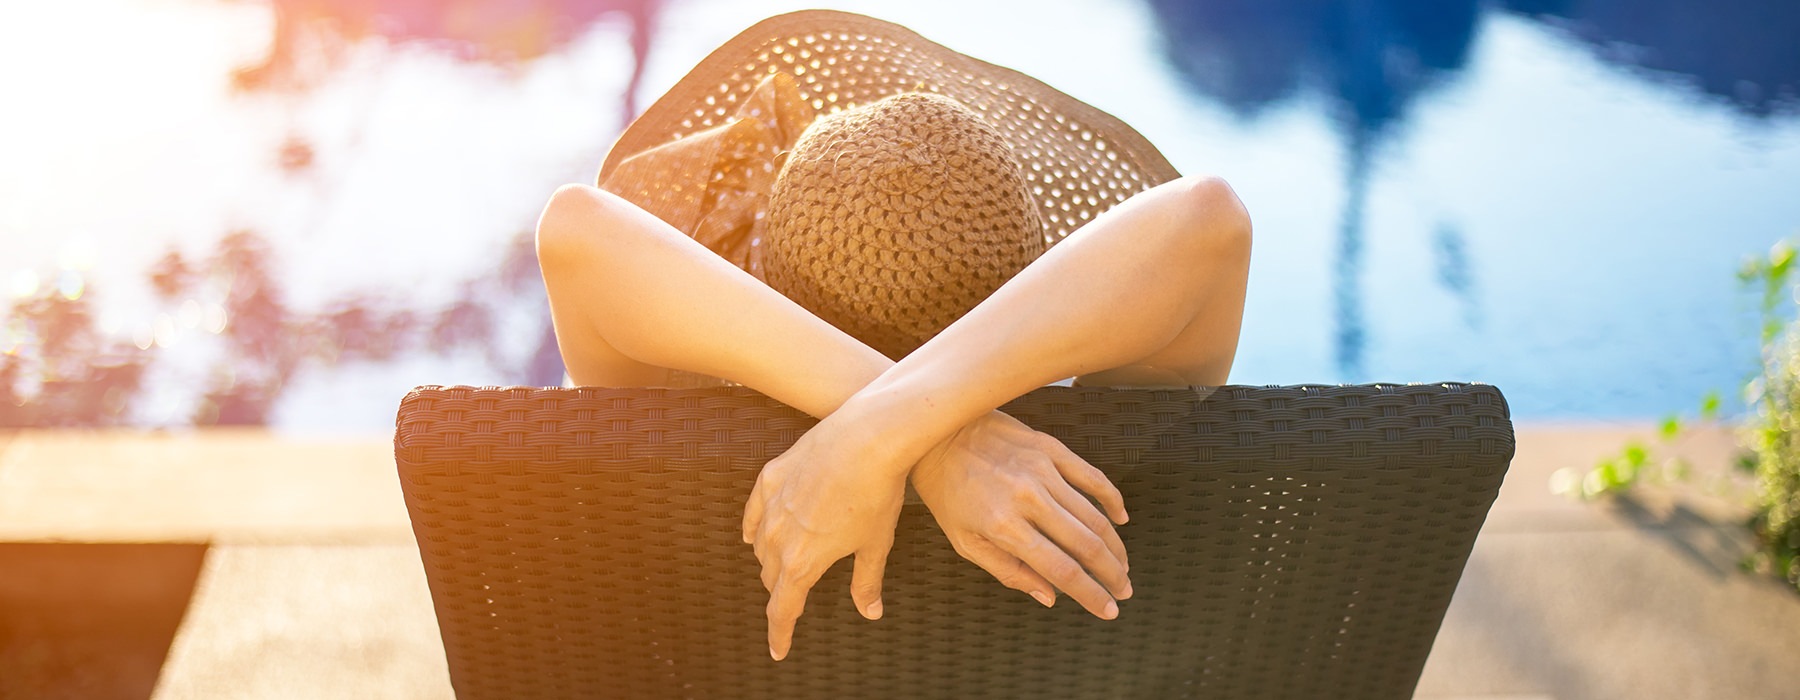 Woman relaxing on a lounge chair near the pool 